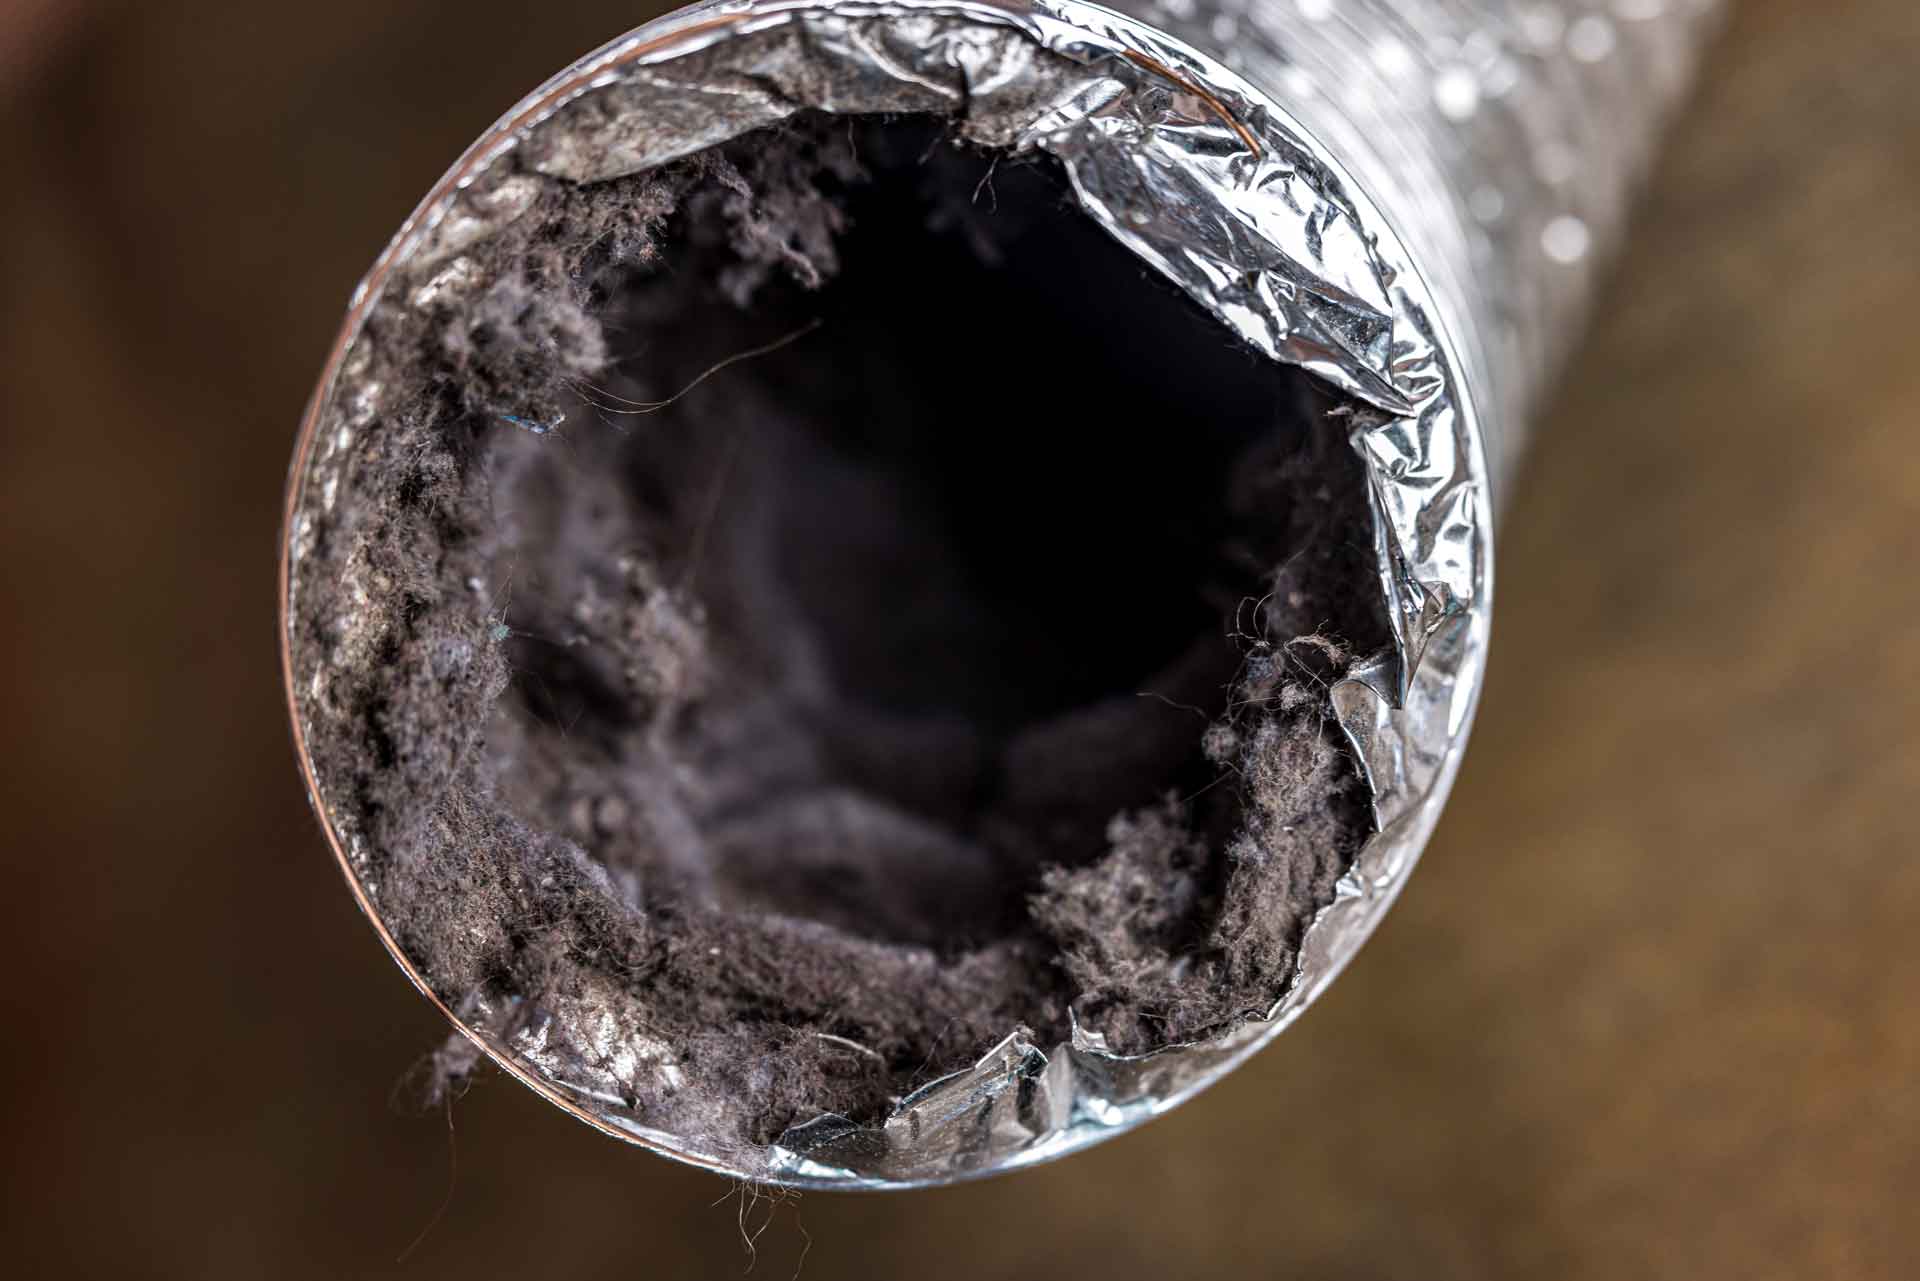 Close-up shot of a dirty dryer vent